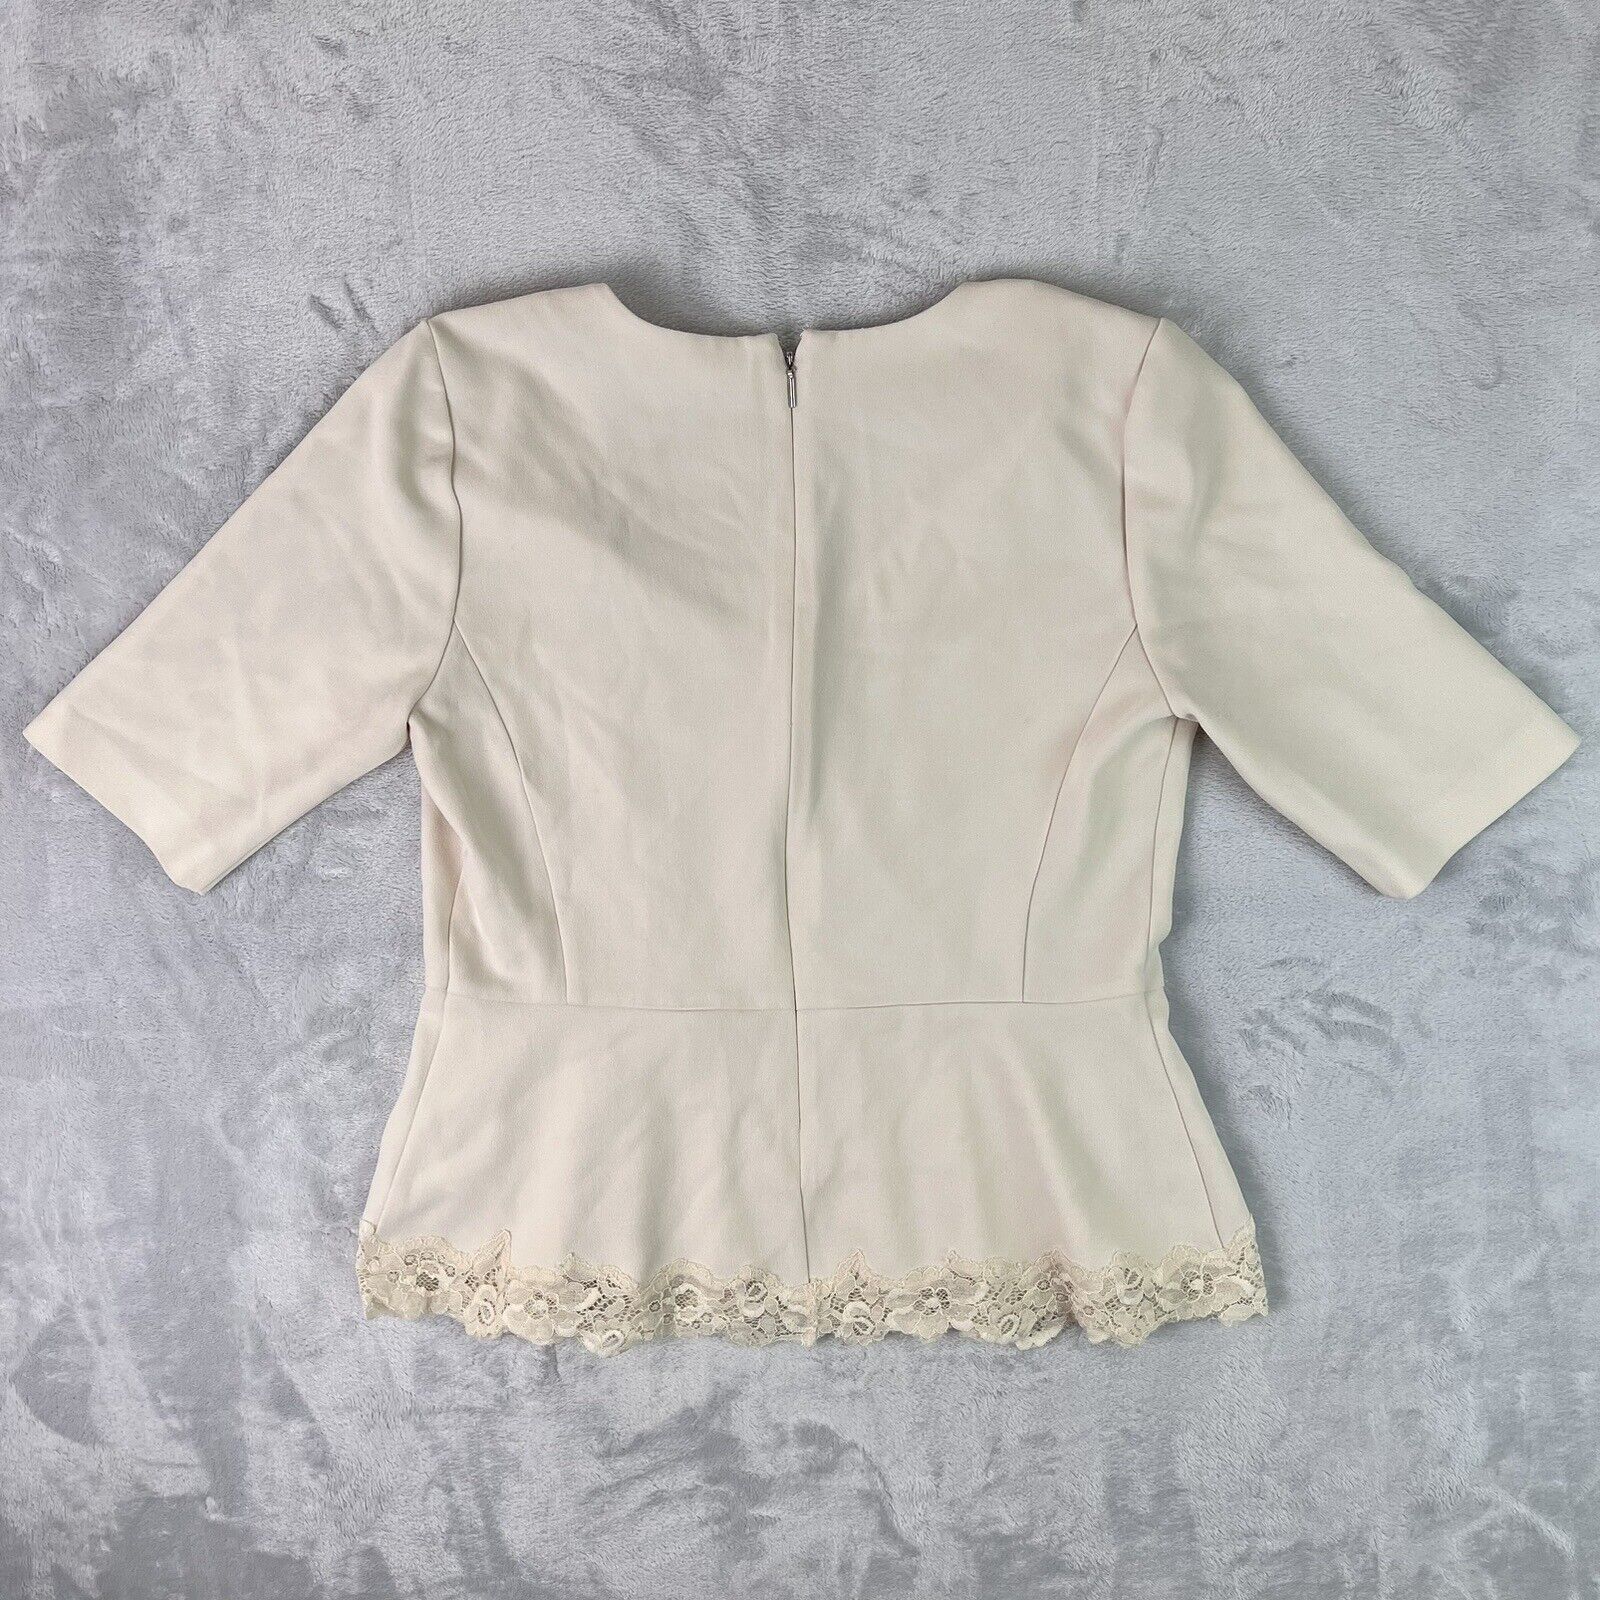 Rebecca Taylor Crepe Lace Inset Top Size 8 Beige … - image 8